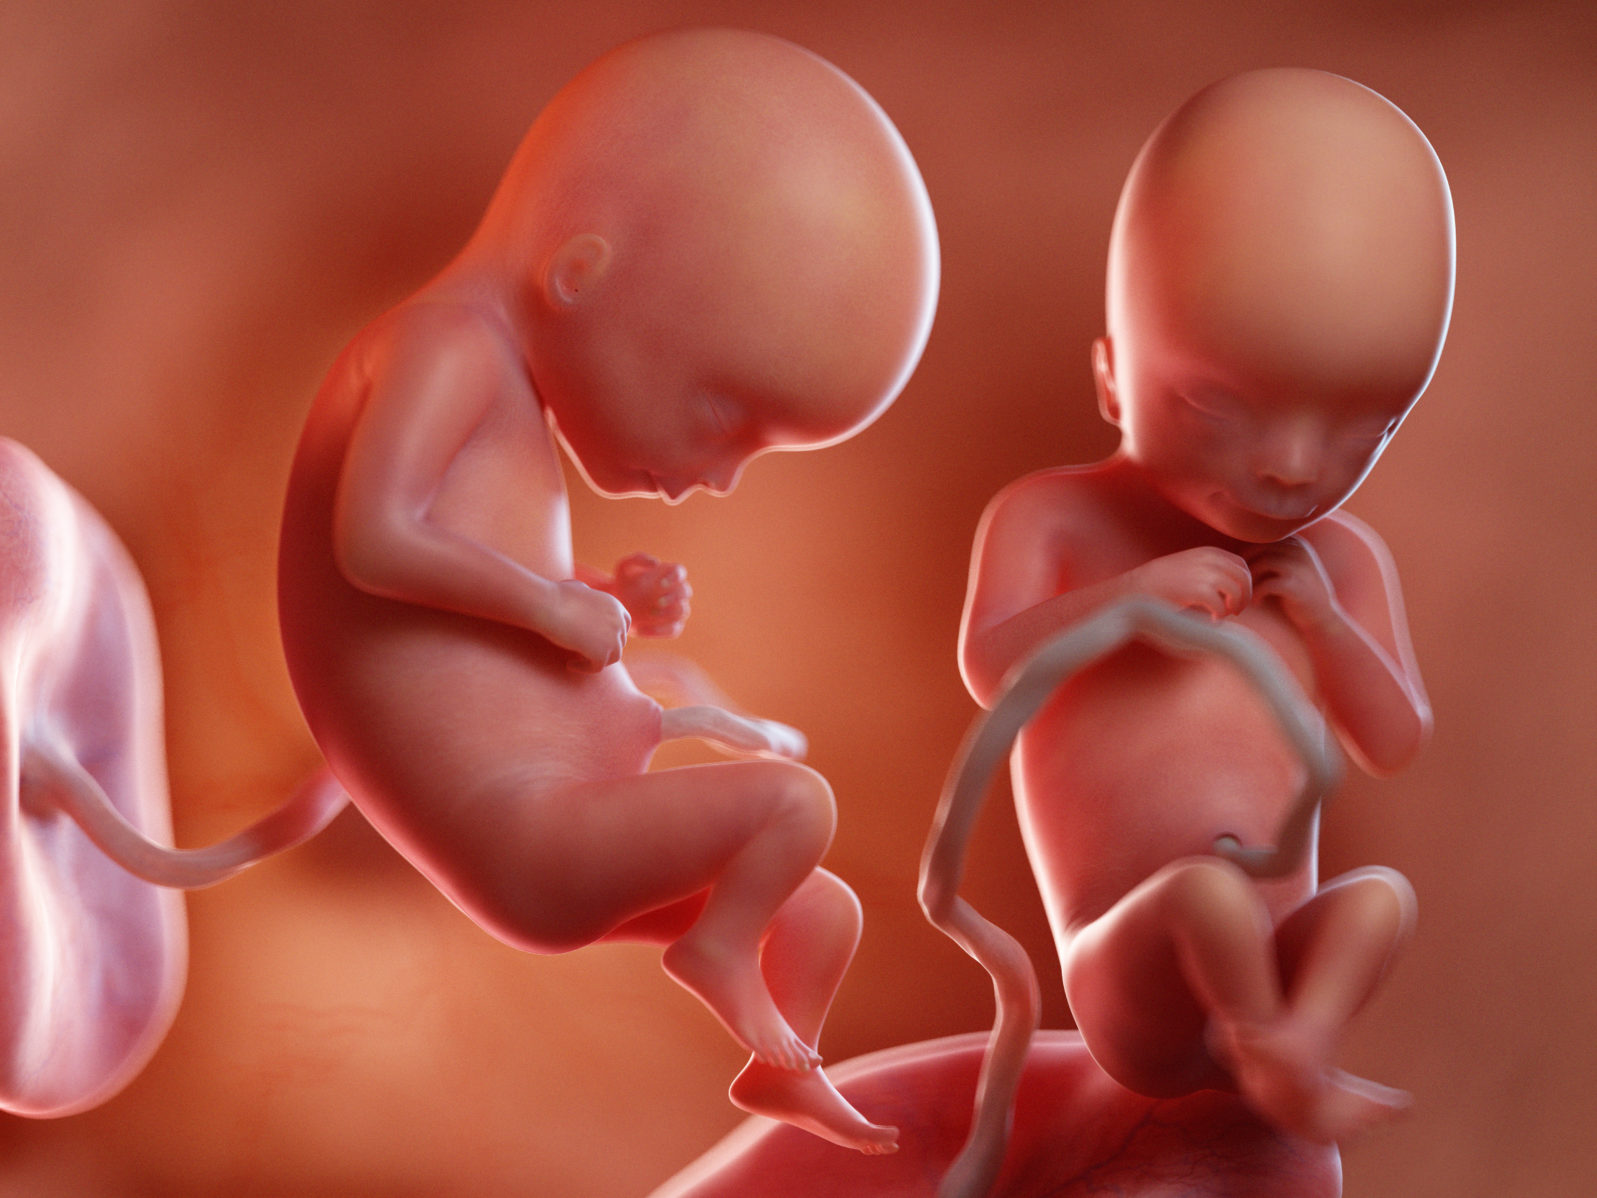 3d rendered medically accurate illustration of twin fetuses - week 17